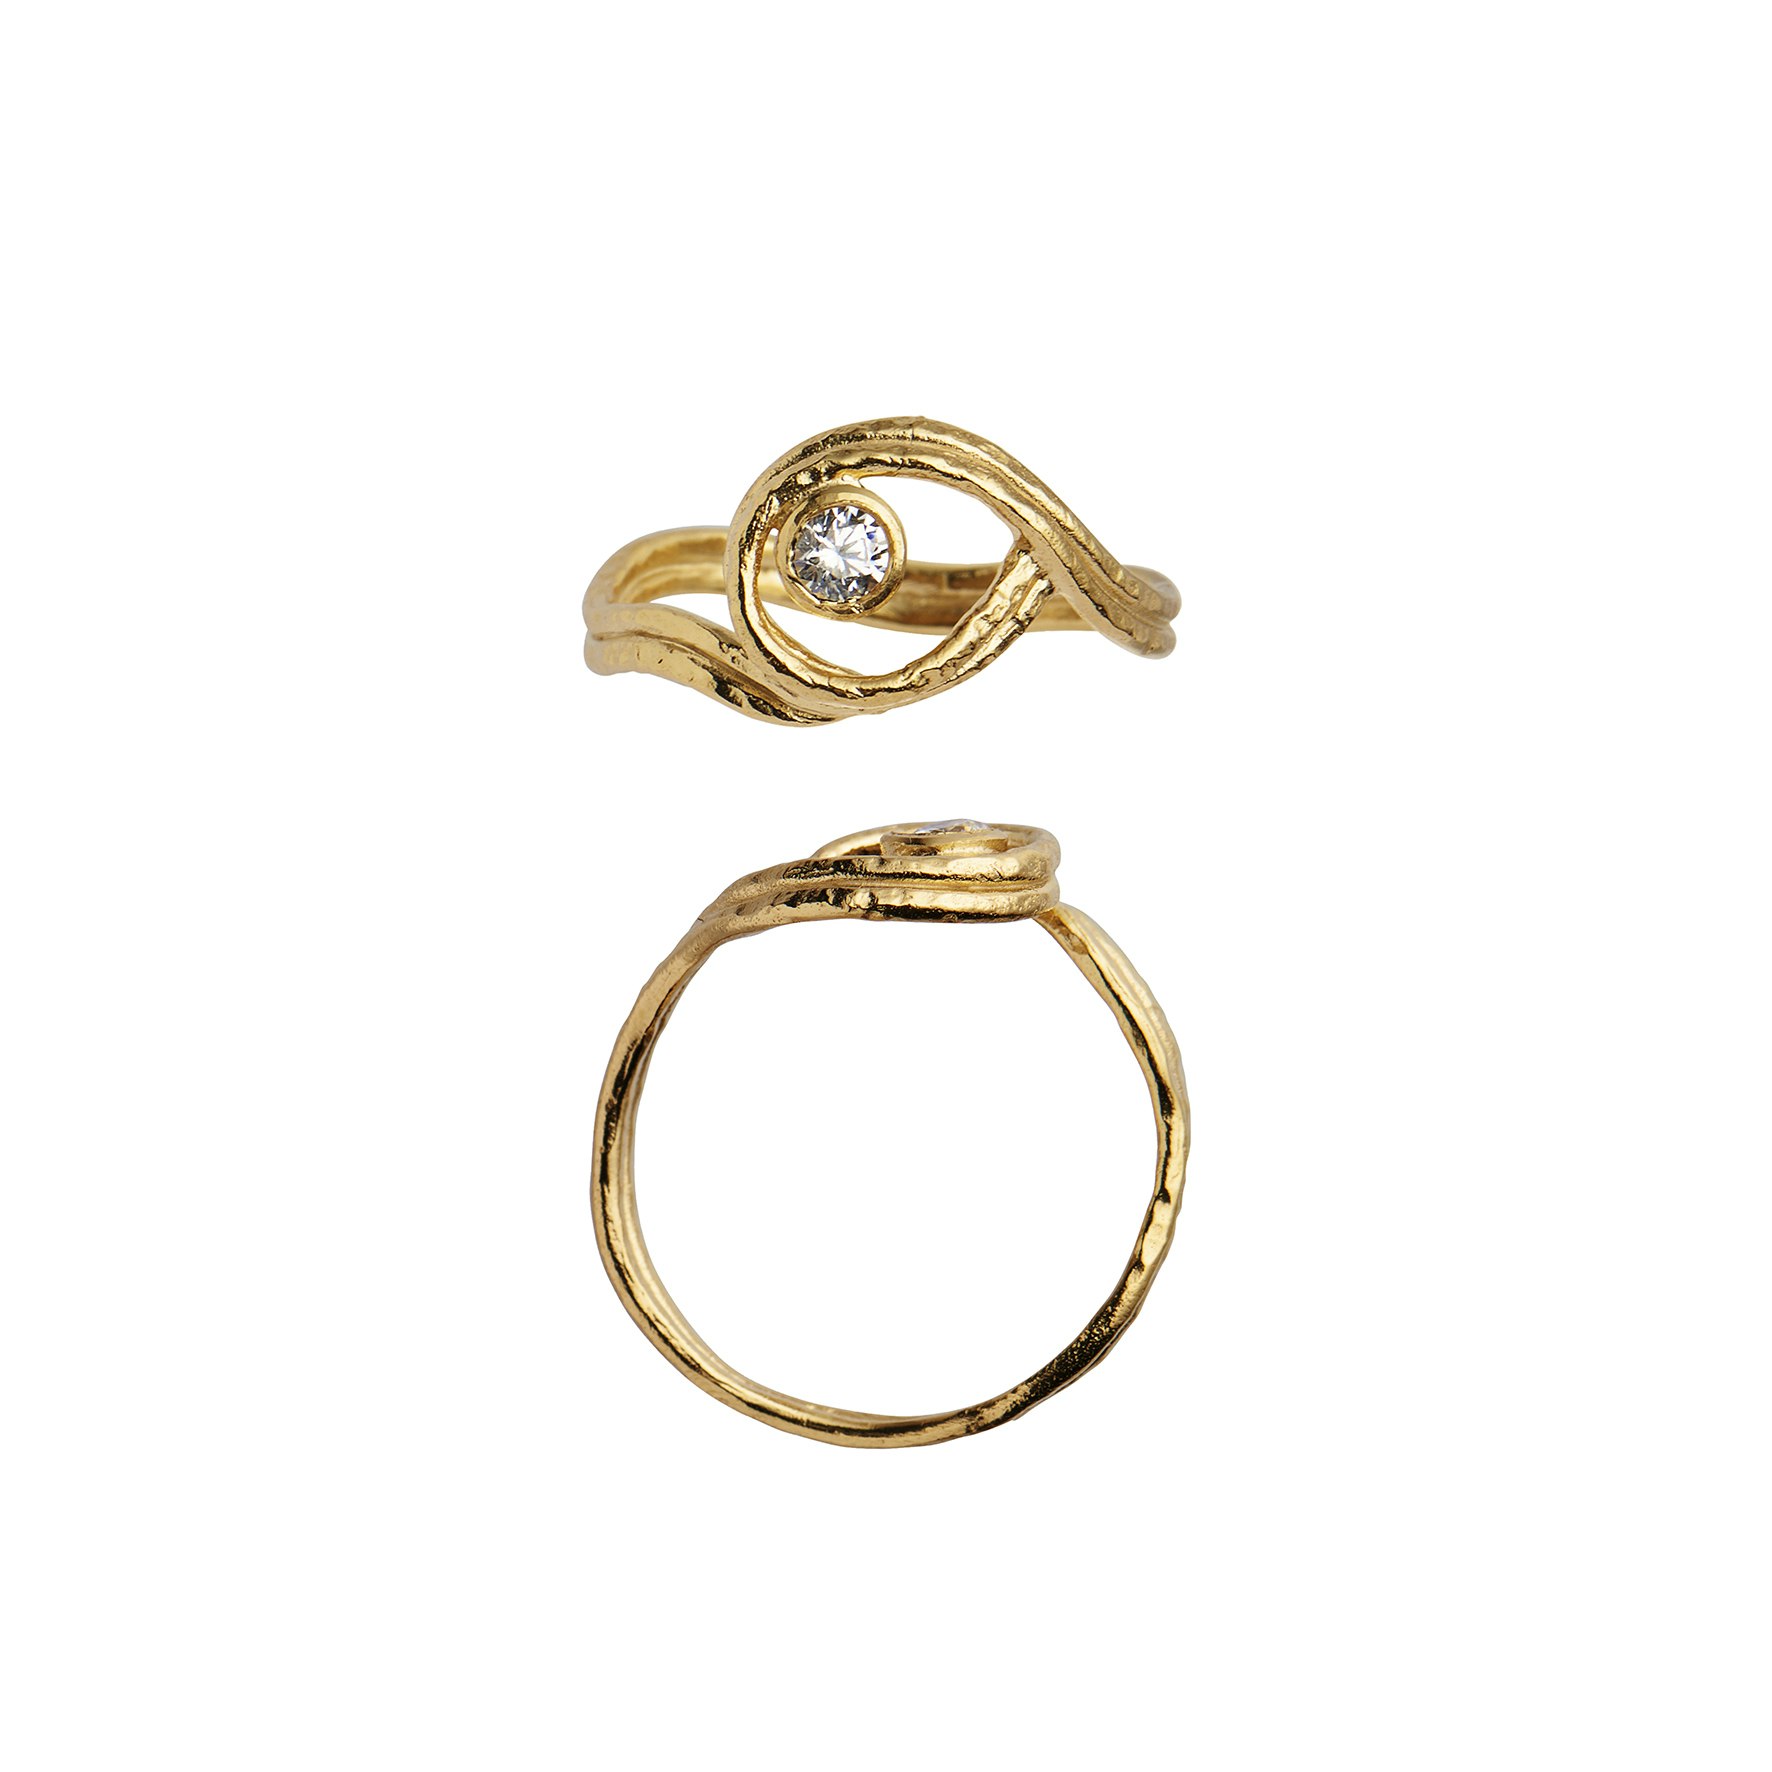 Balance Ring With Stone from STINE A Jewelry in Goldplated Silver Sterling 925